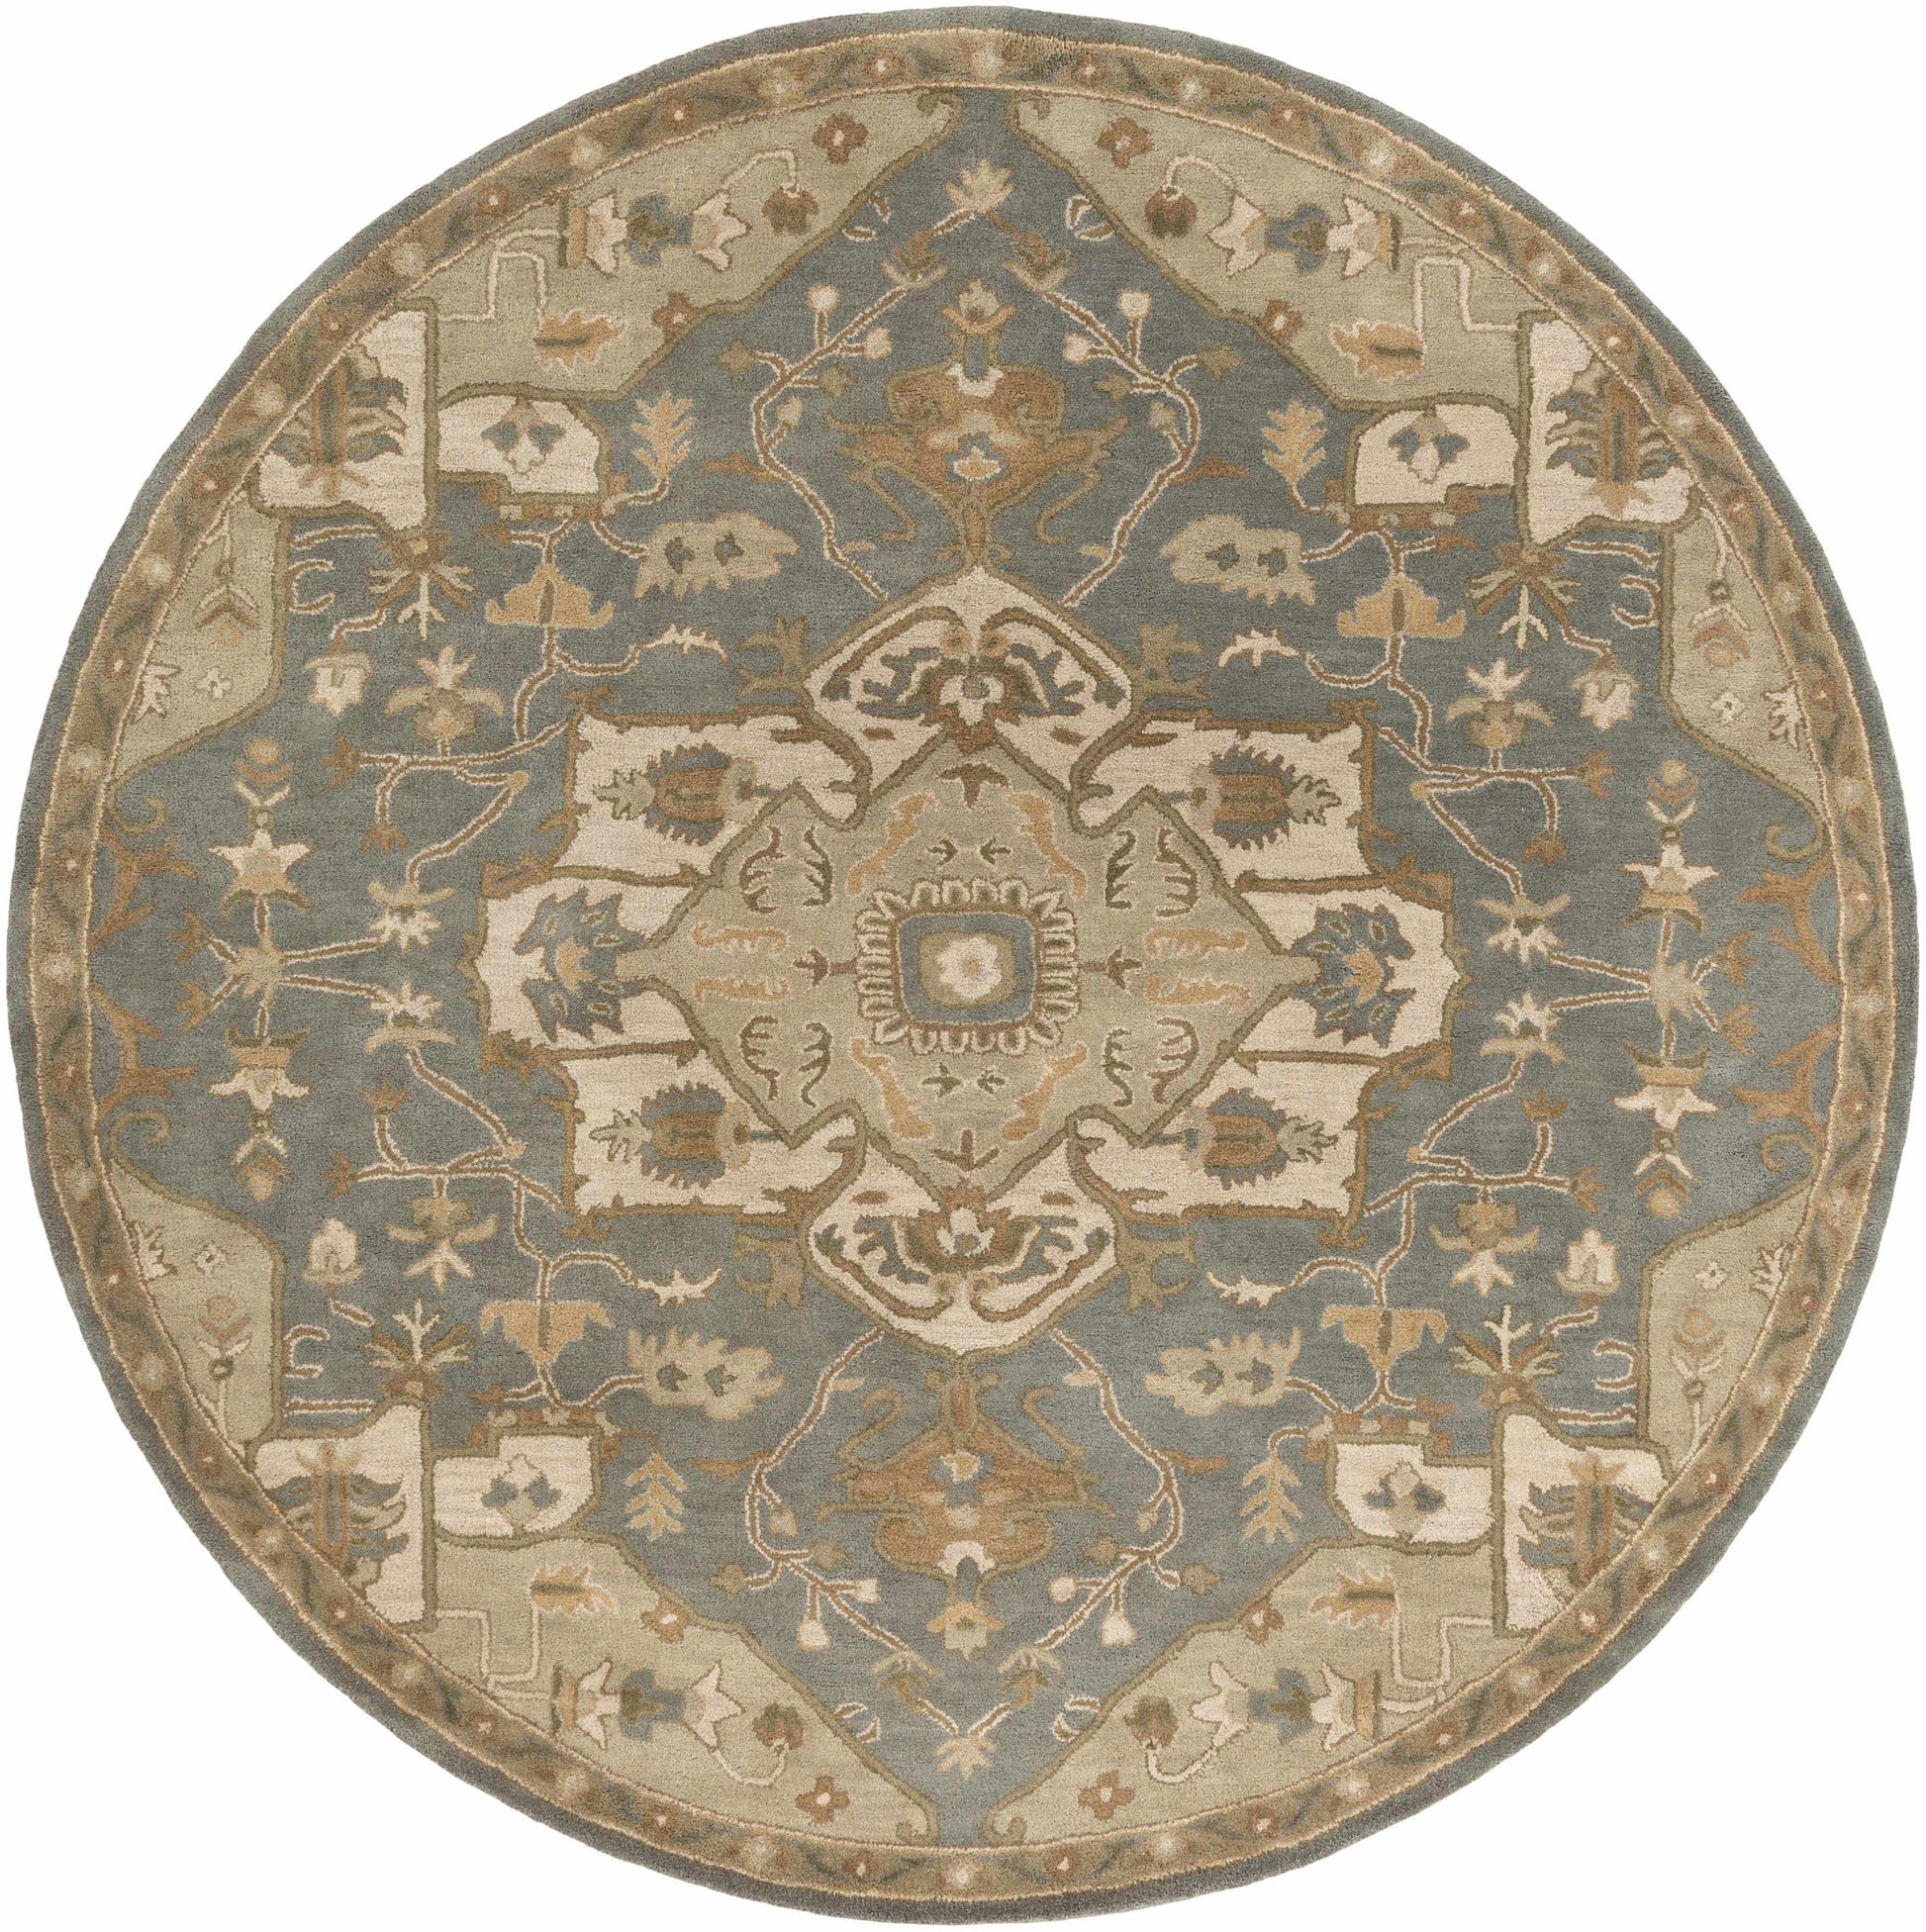 Boutique Rugs Rugs 8' Round Broomfield Gray 1144 Wool Area Rug